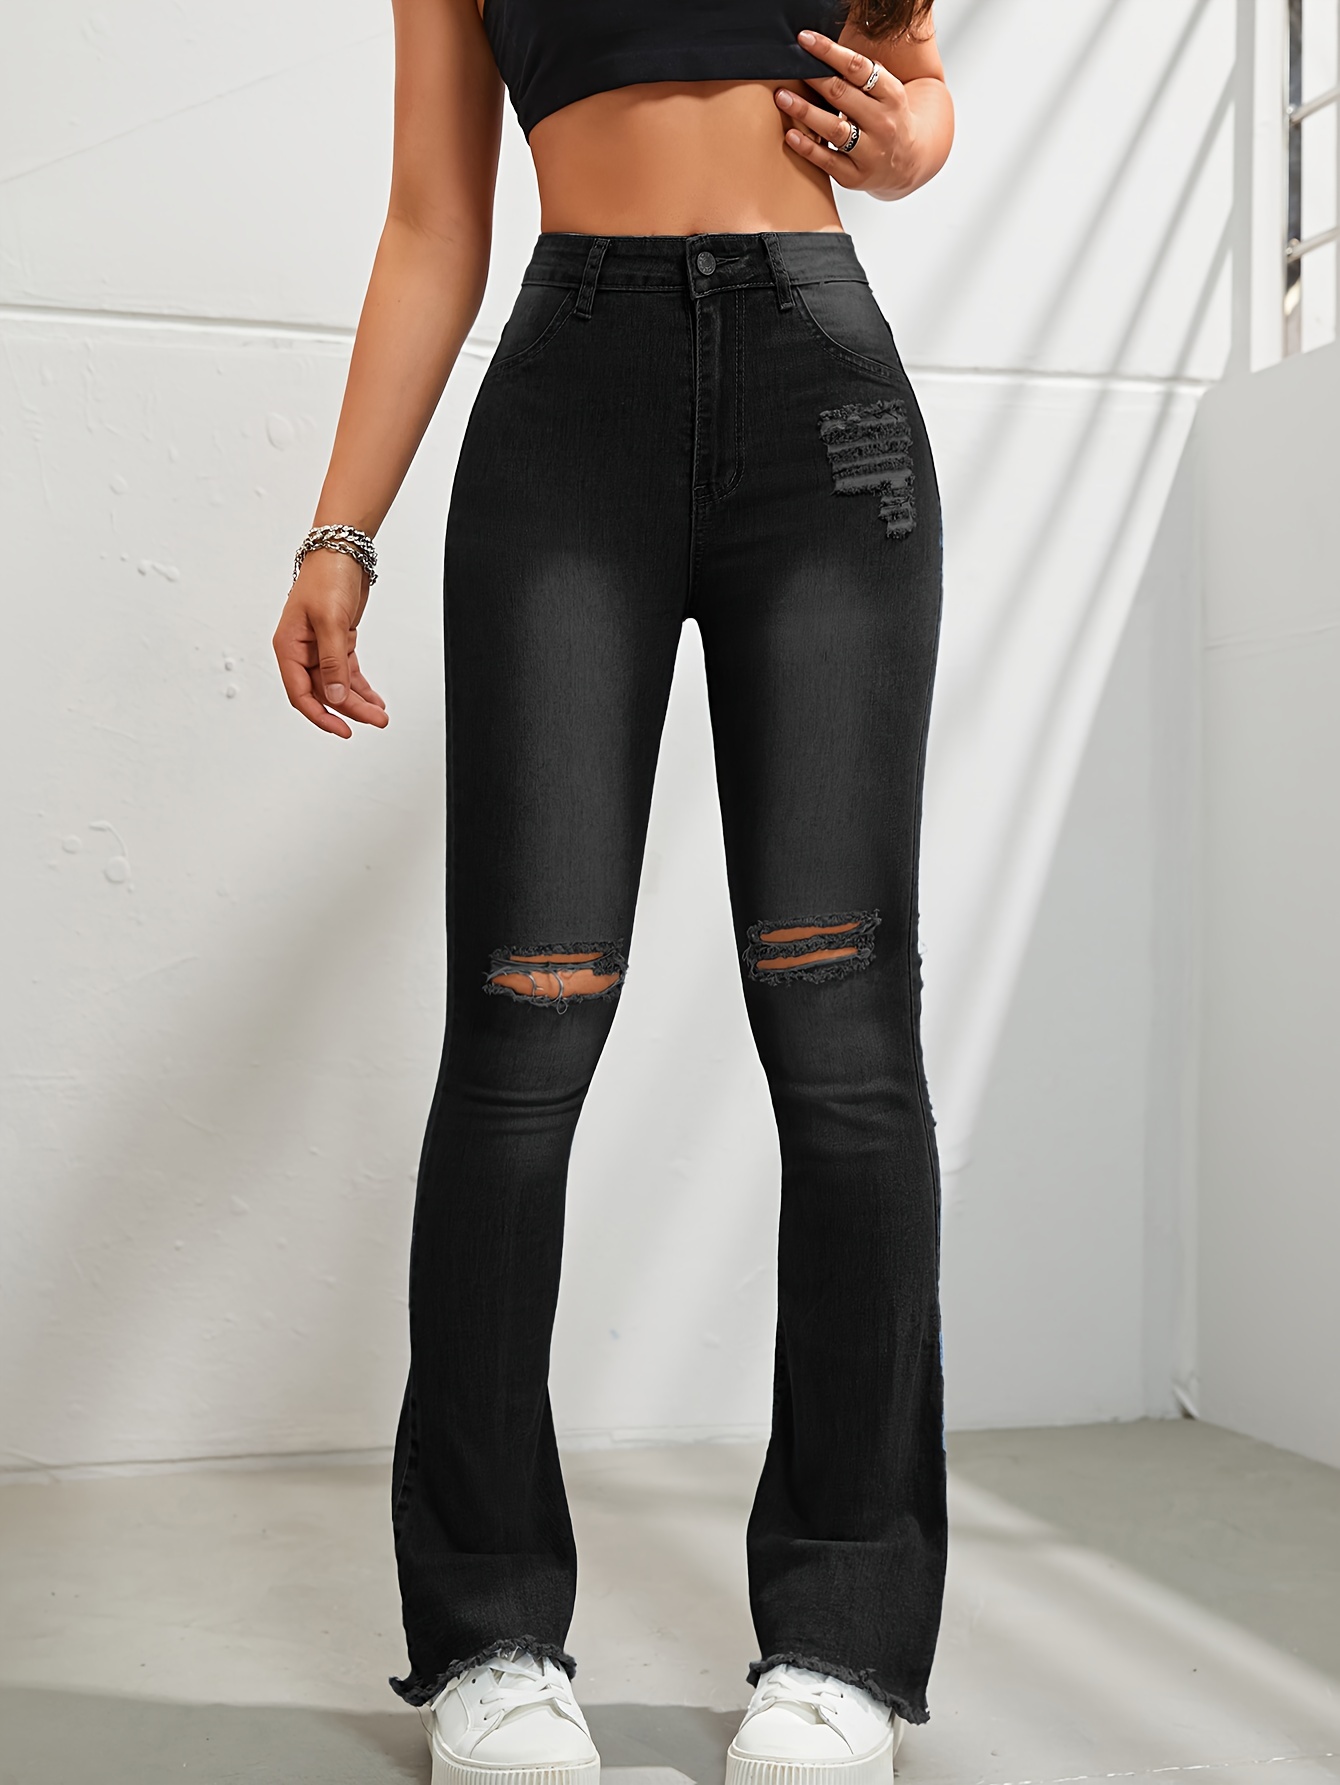 Plain Pipped Holes Flare Jeans, Slash Pockets Distressed High